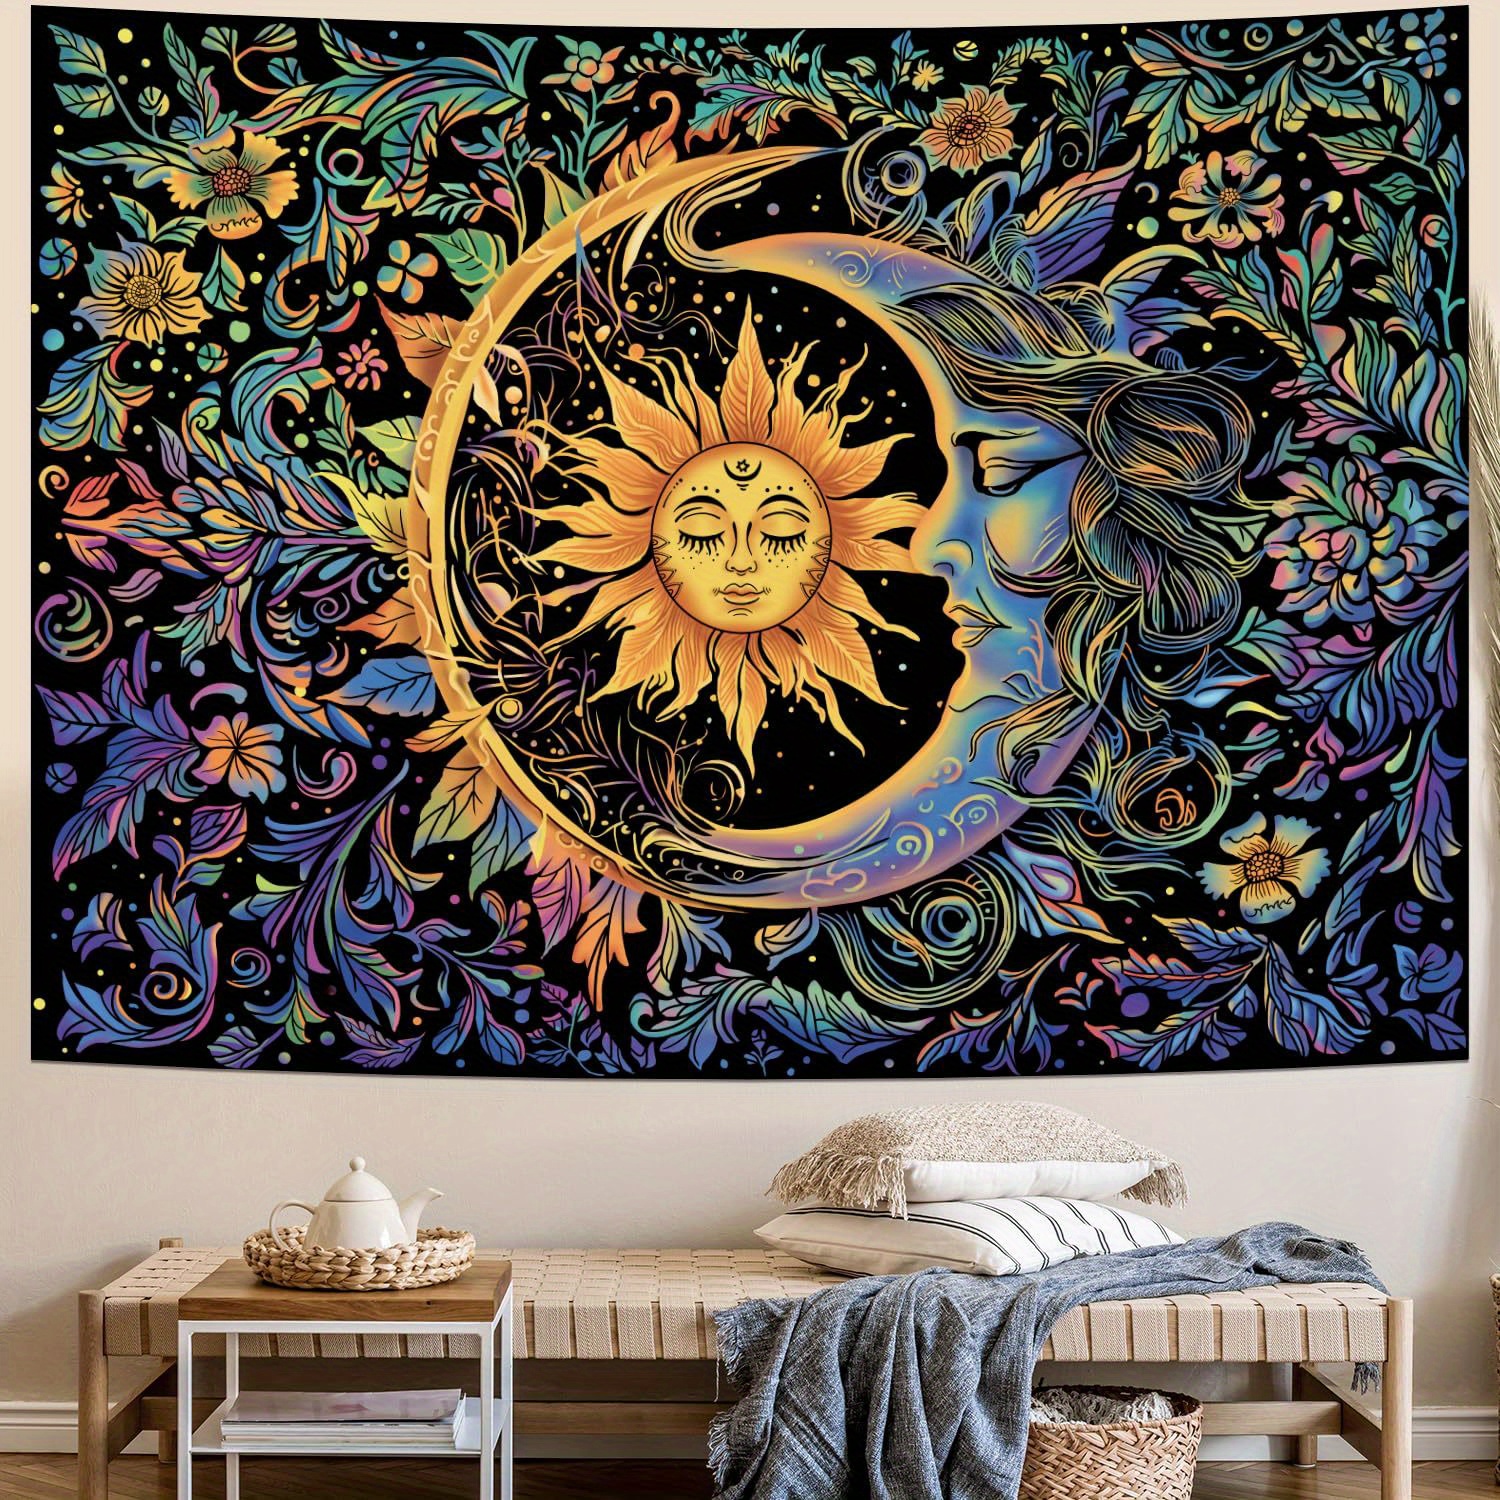 

1pc, Sun And Moon Tapestry Psychedelic Mystic Floral Tapestry Hippie Boho Flower Plants Wall Tapestry Vintage Aesthetic Tapestry Wall Hanging For Bedroom Dorm Wall Art Decor Gift